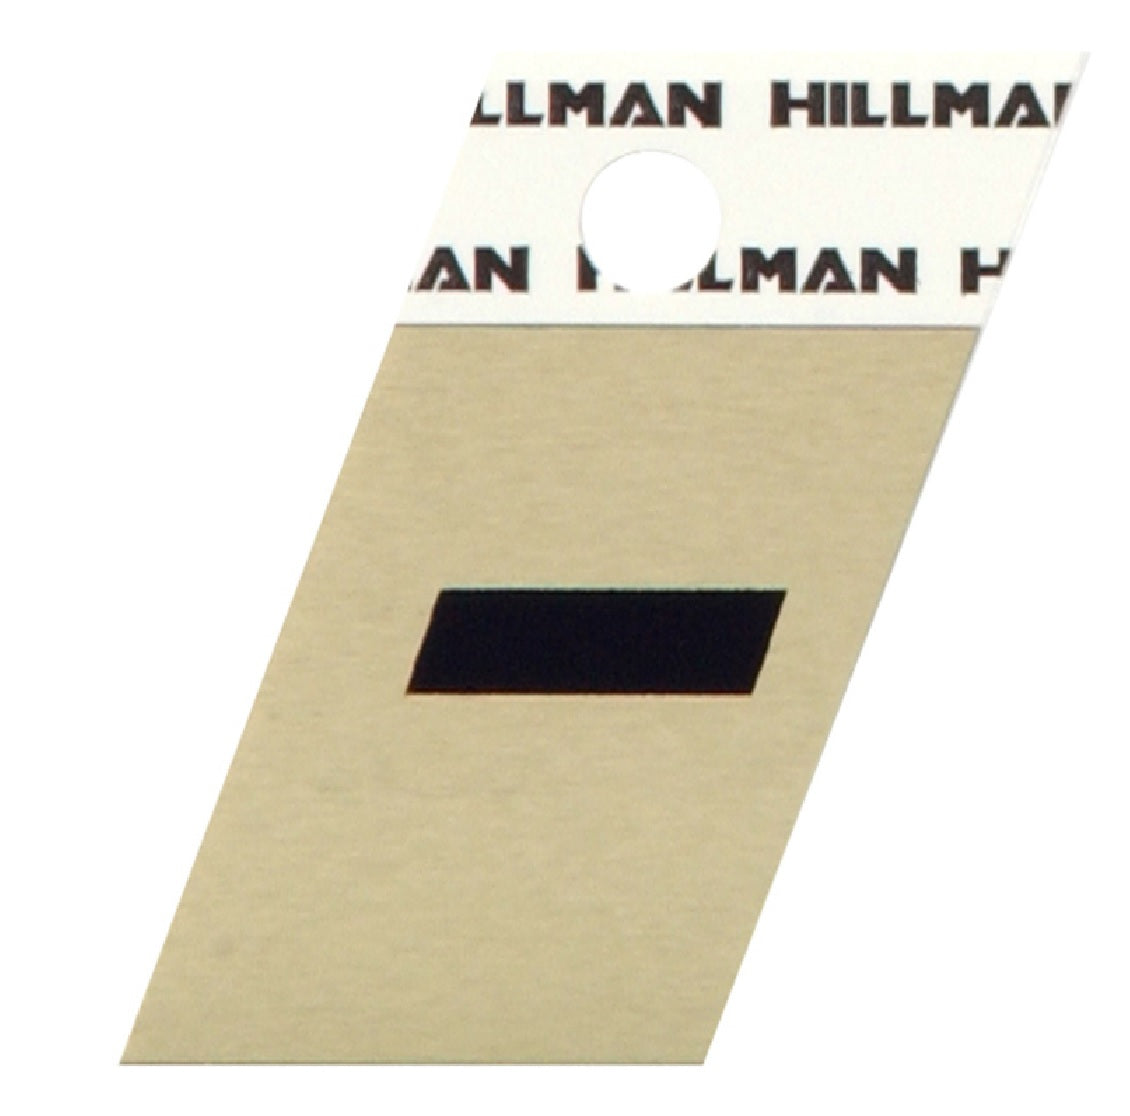 Hillman Fastaners 840548 Reflective Self-Adhesive Special Character Hyphen, Black